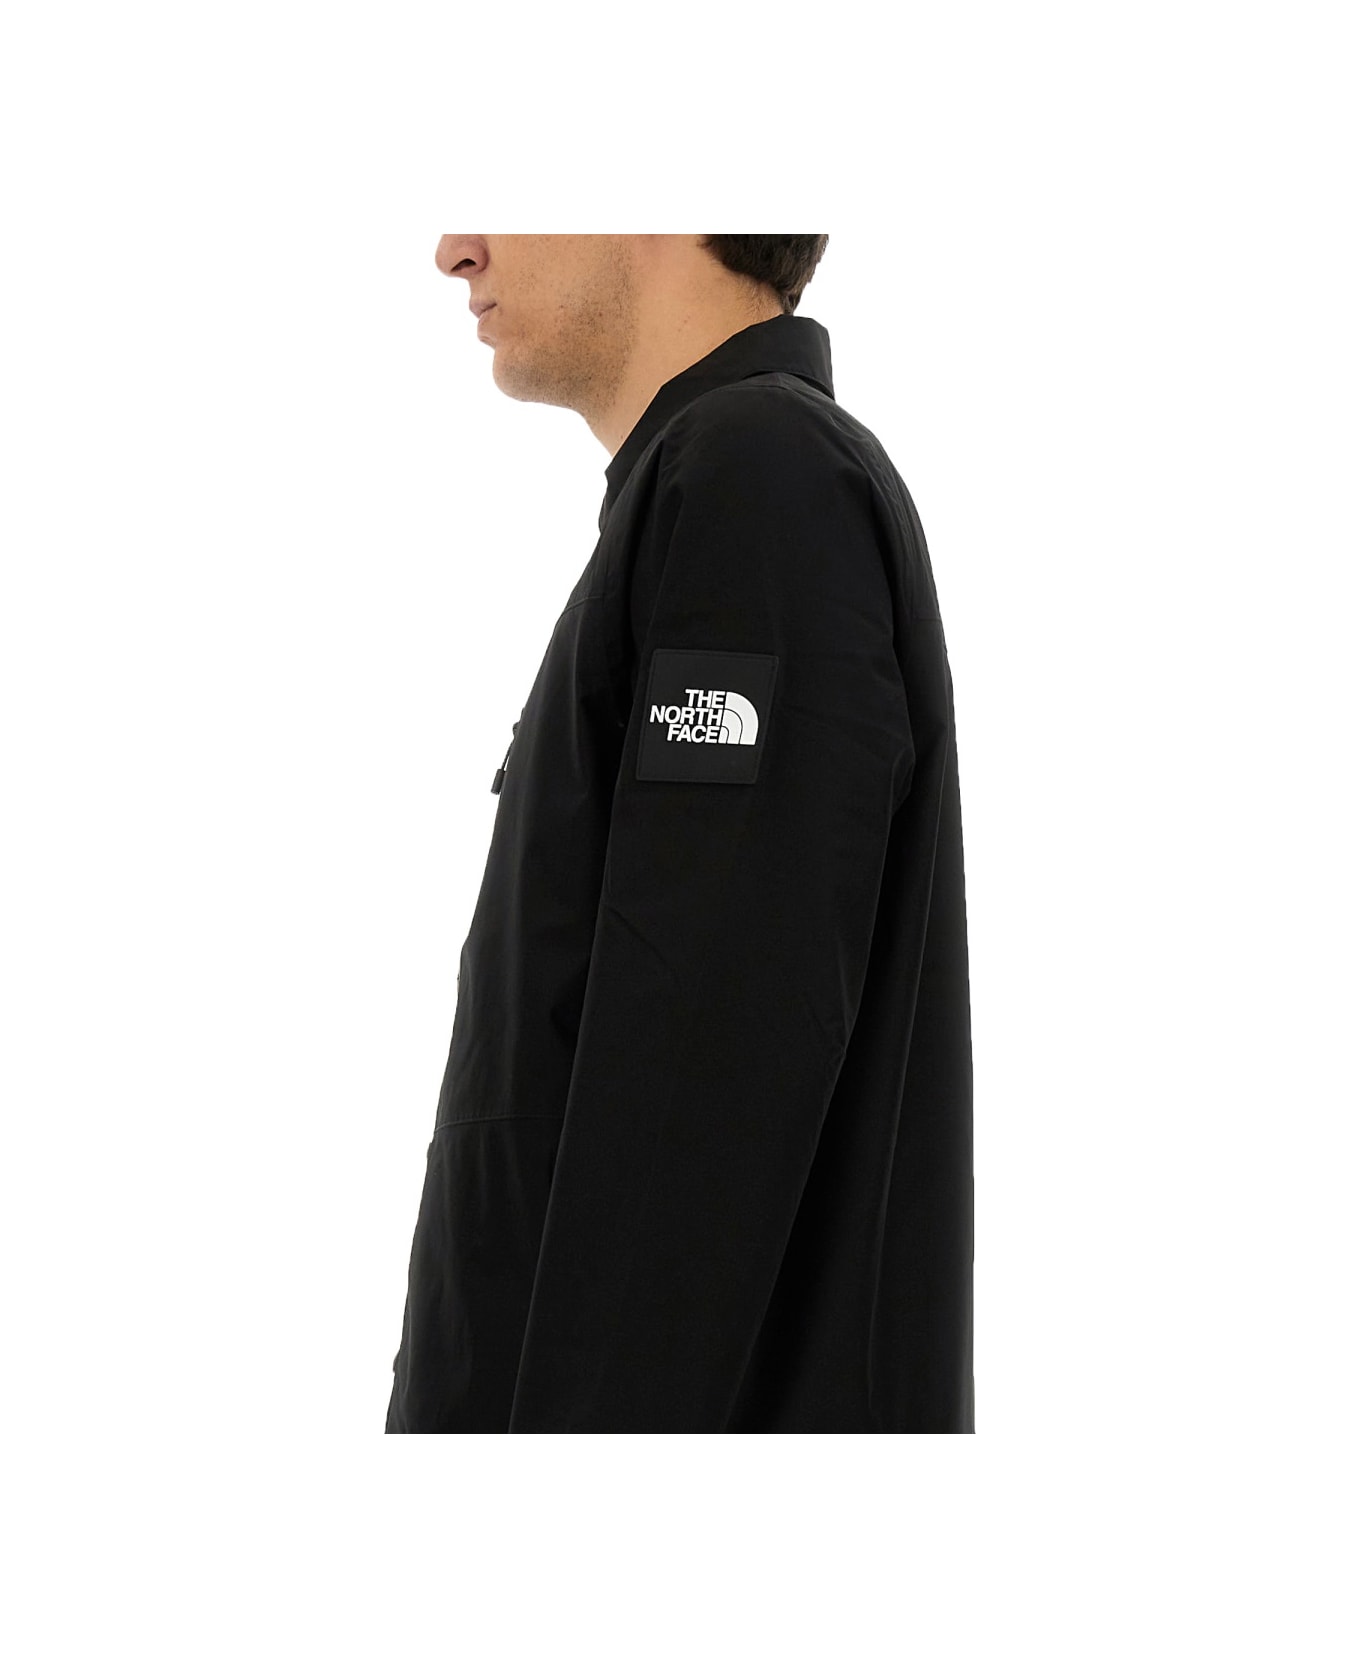 The North Face Jacket With Logo - BLACK